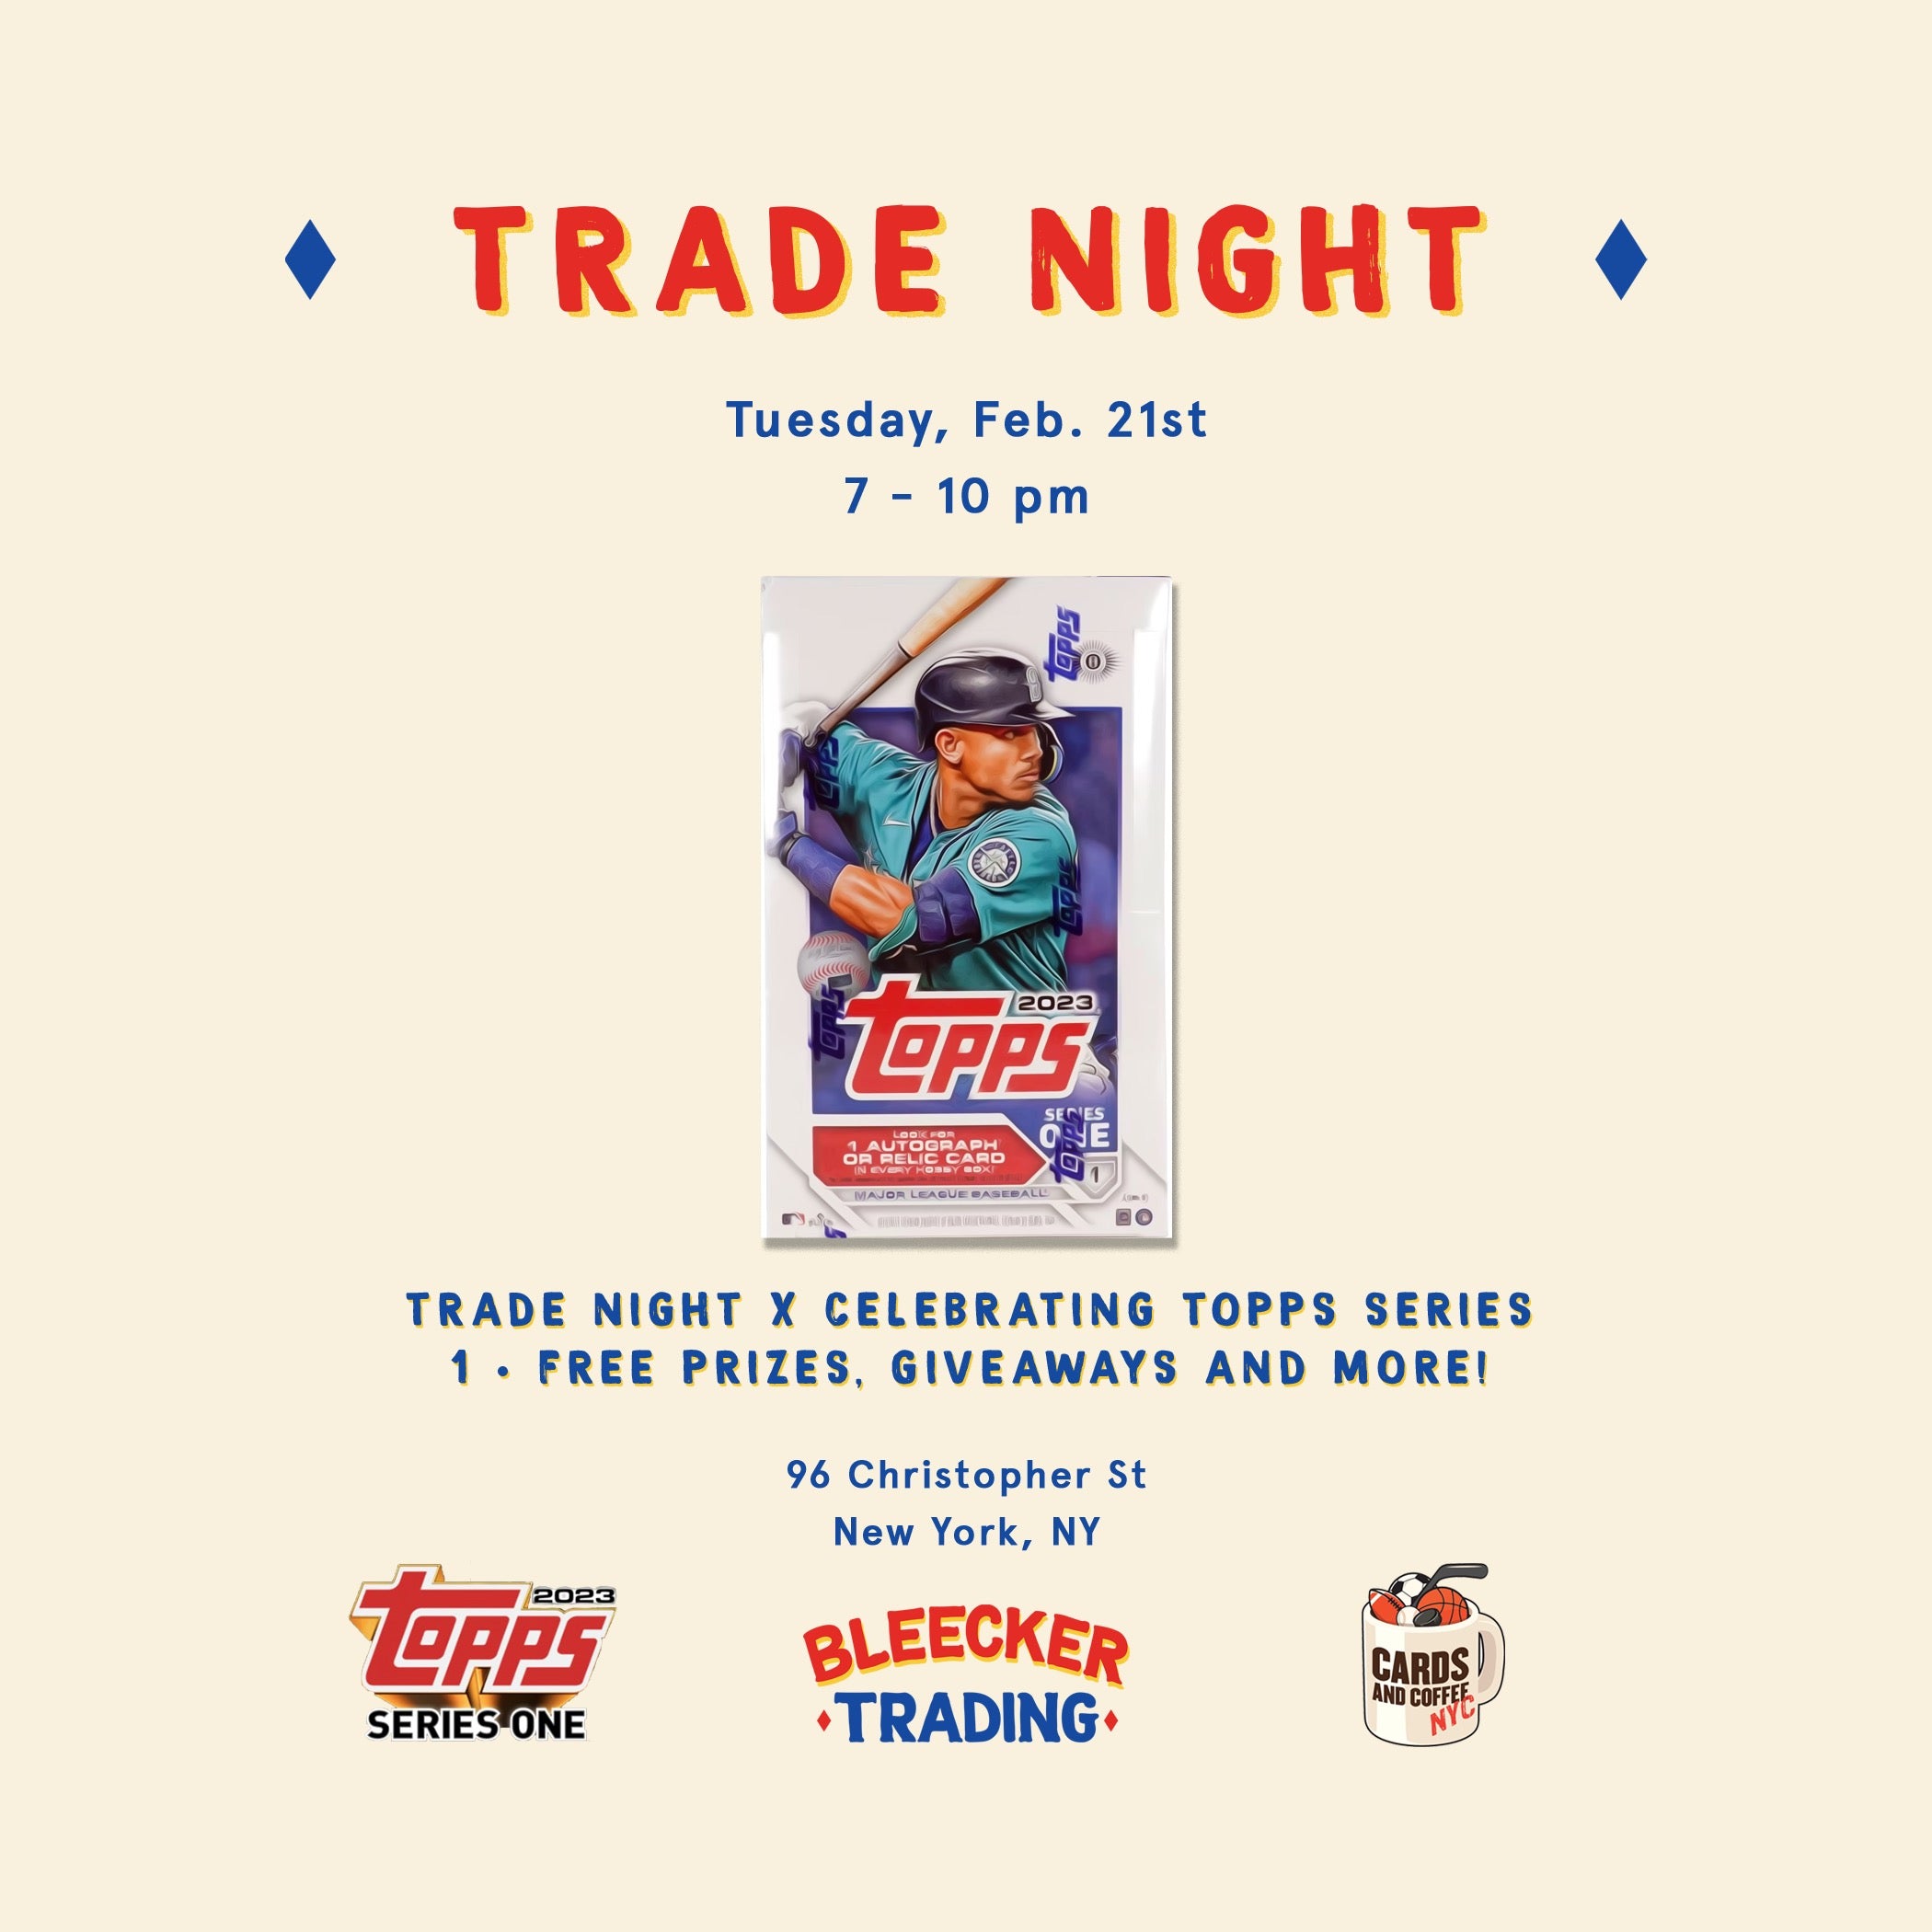 February 21st Trade Night hosted by Topps